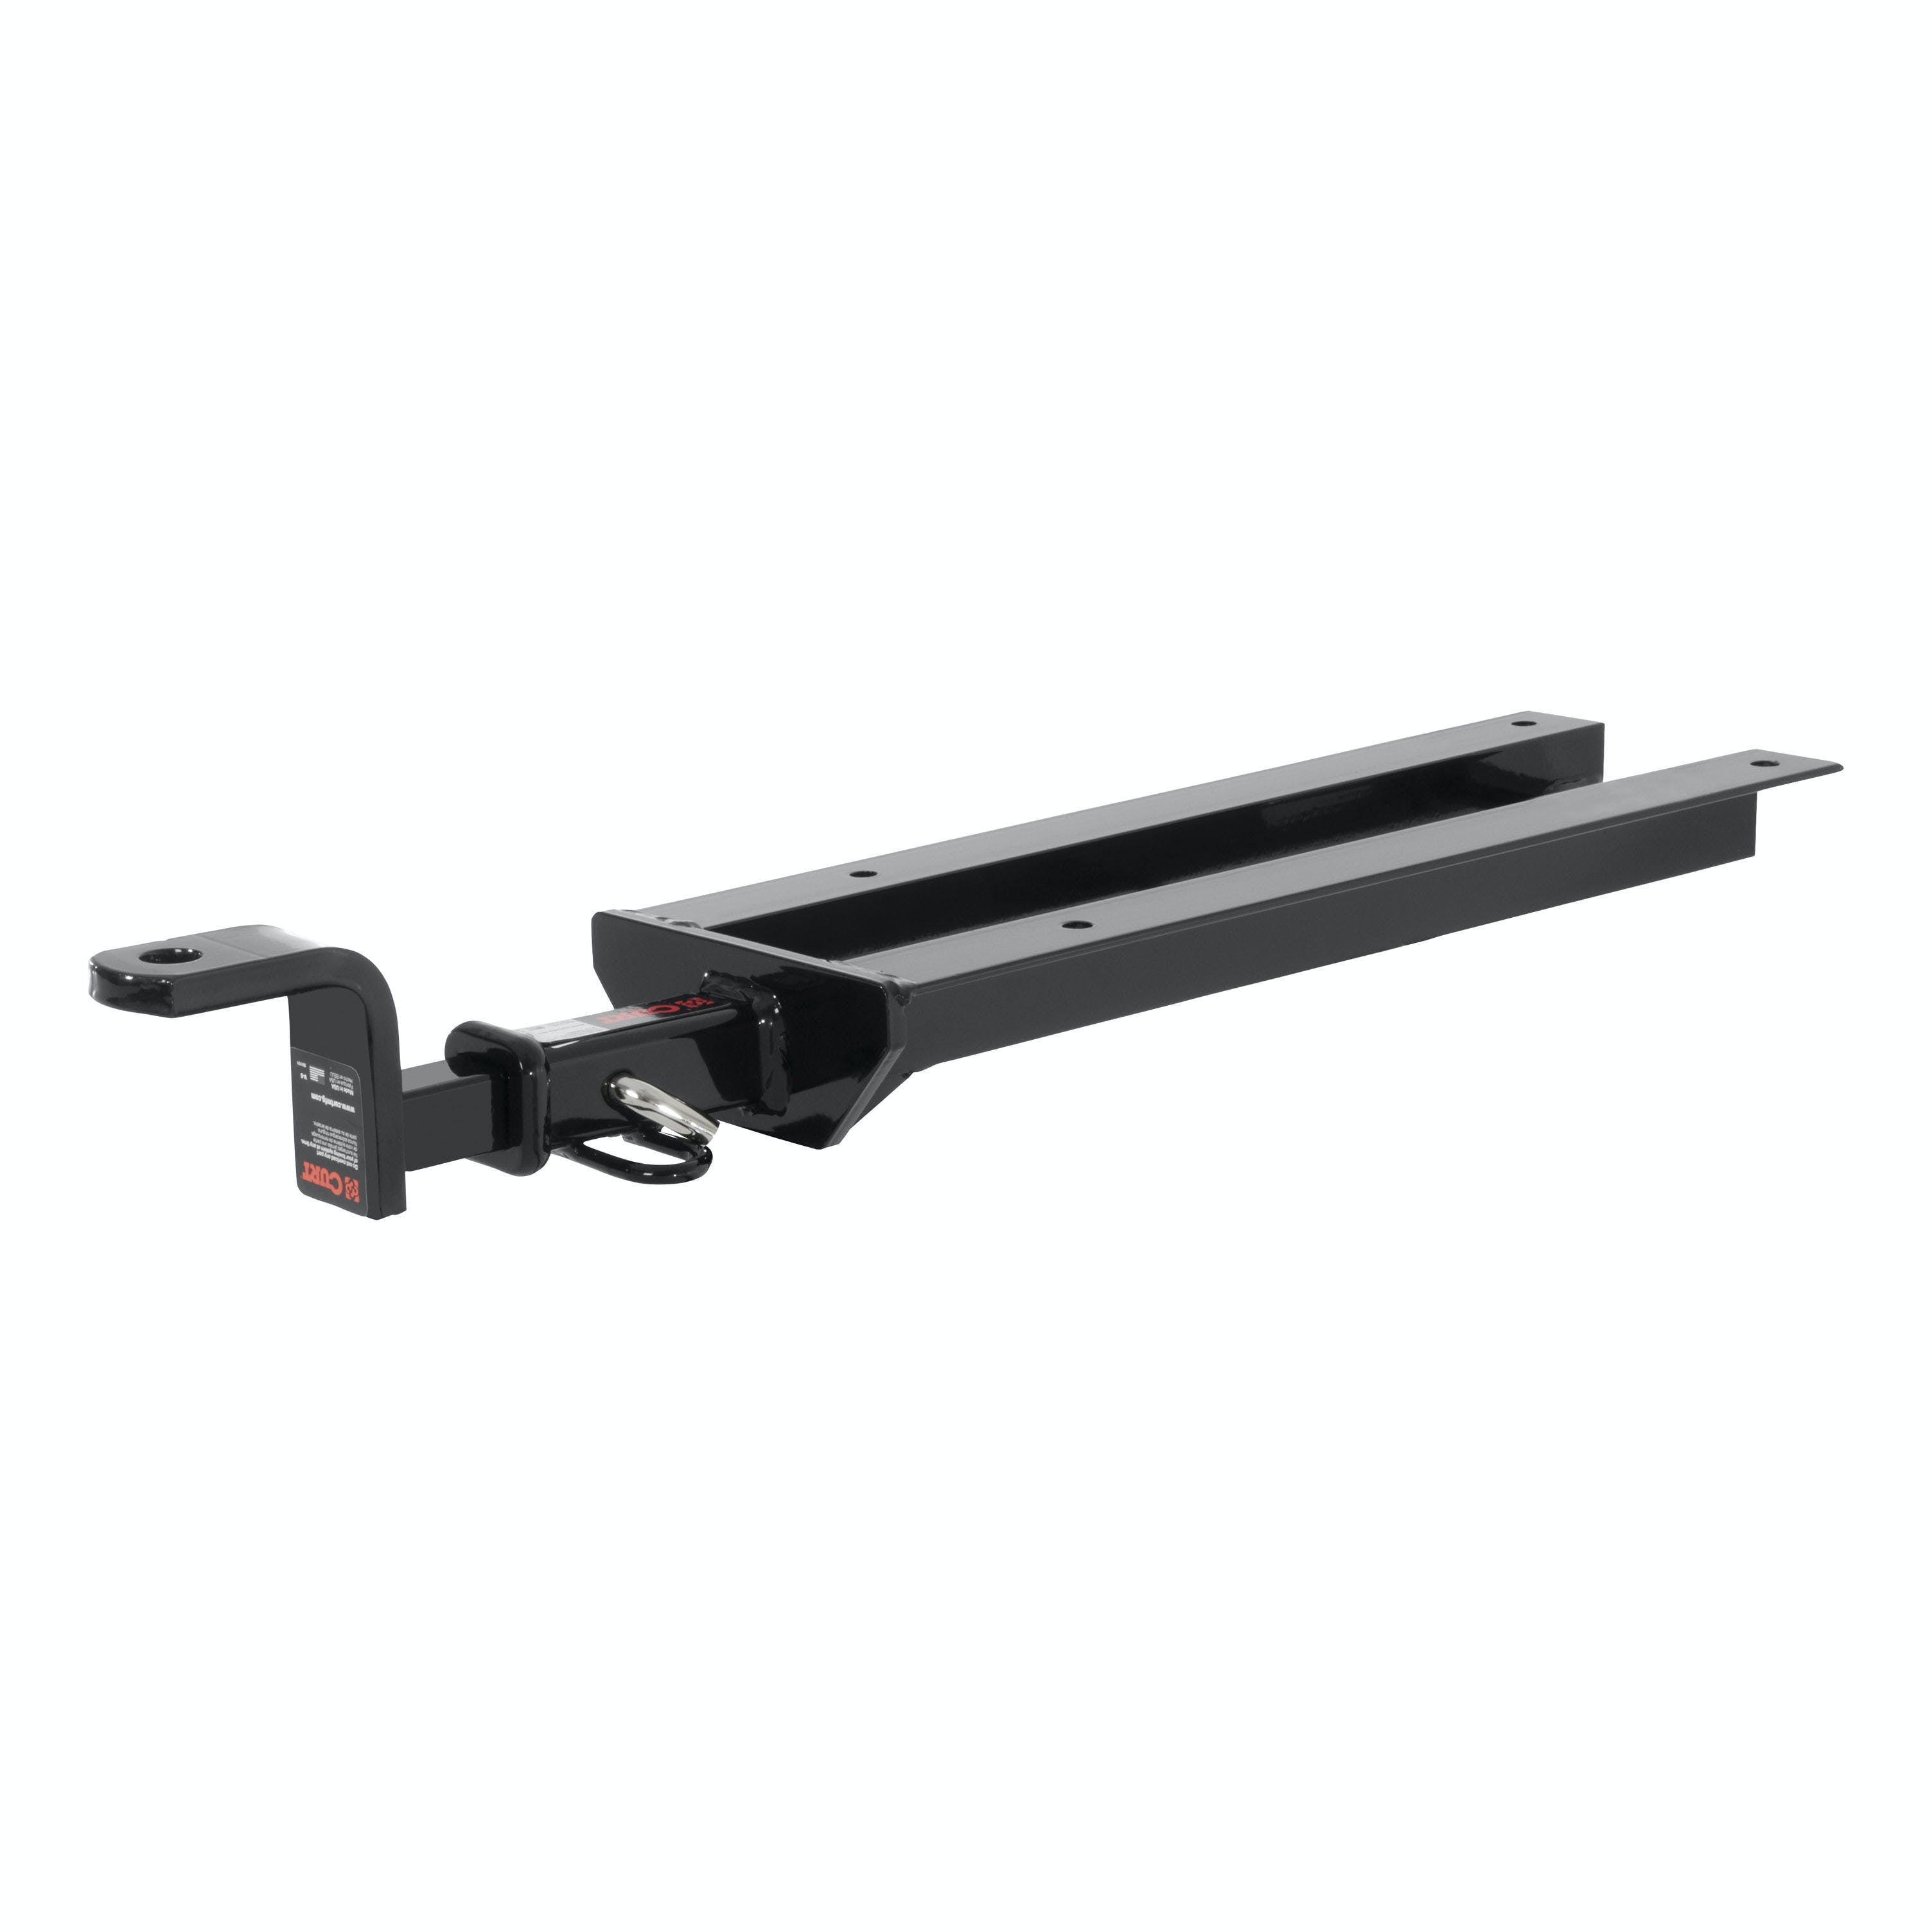 CURT 118223 Class 1 Trailer Hitch, 1-1/4 Ball Mount, Select Volvo S40, V40